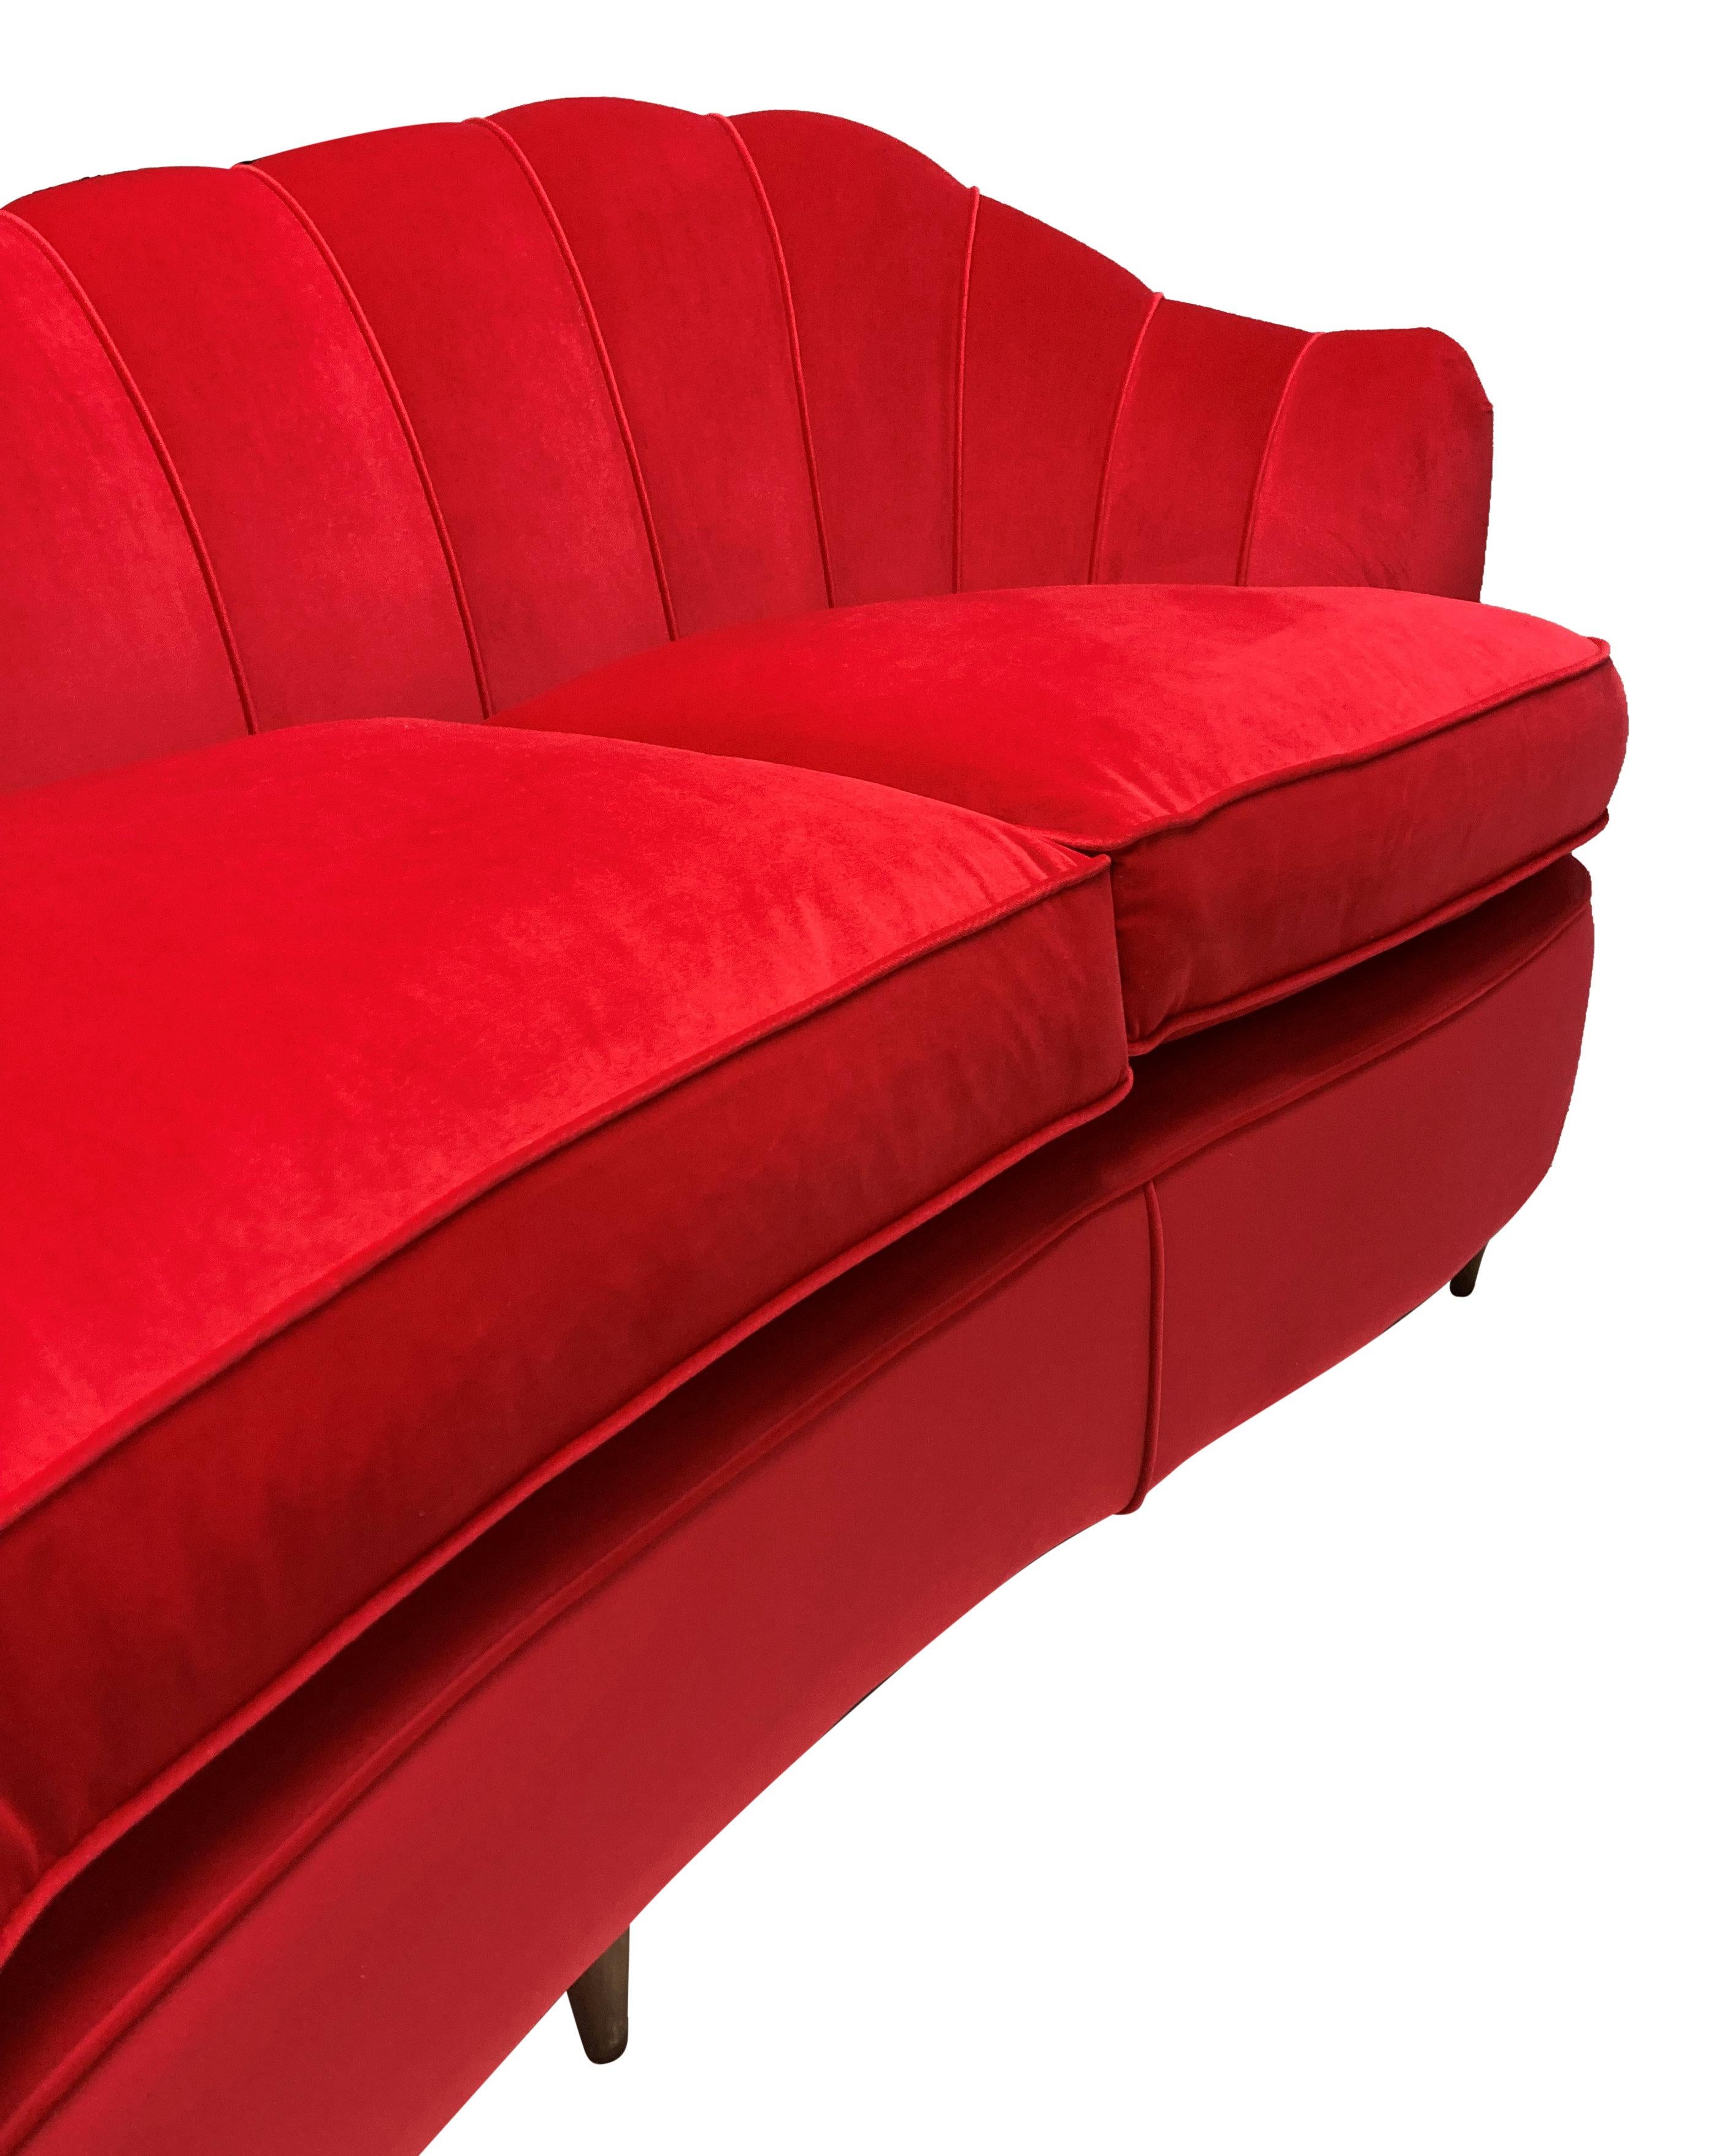 A large, curved sofa with scalloped back in the style of Gio Ponti. Of generous proportions, with three newly feathered cushion seats and newly upholstered throughout in red velvet.